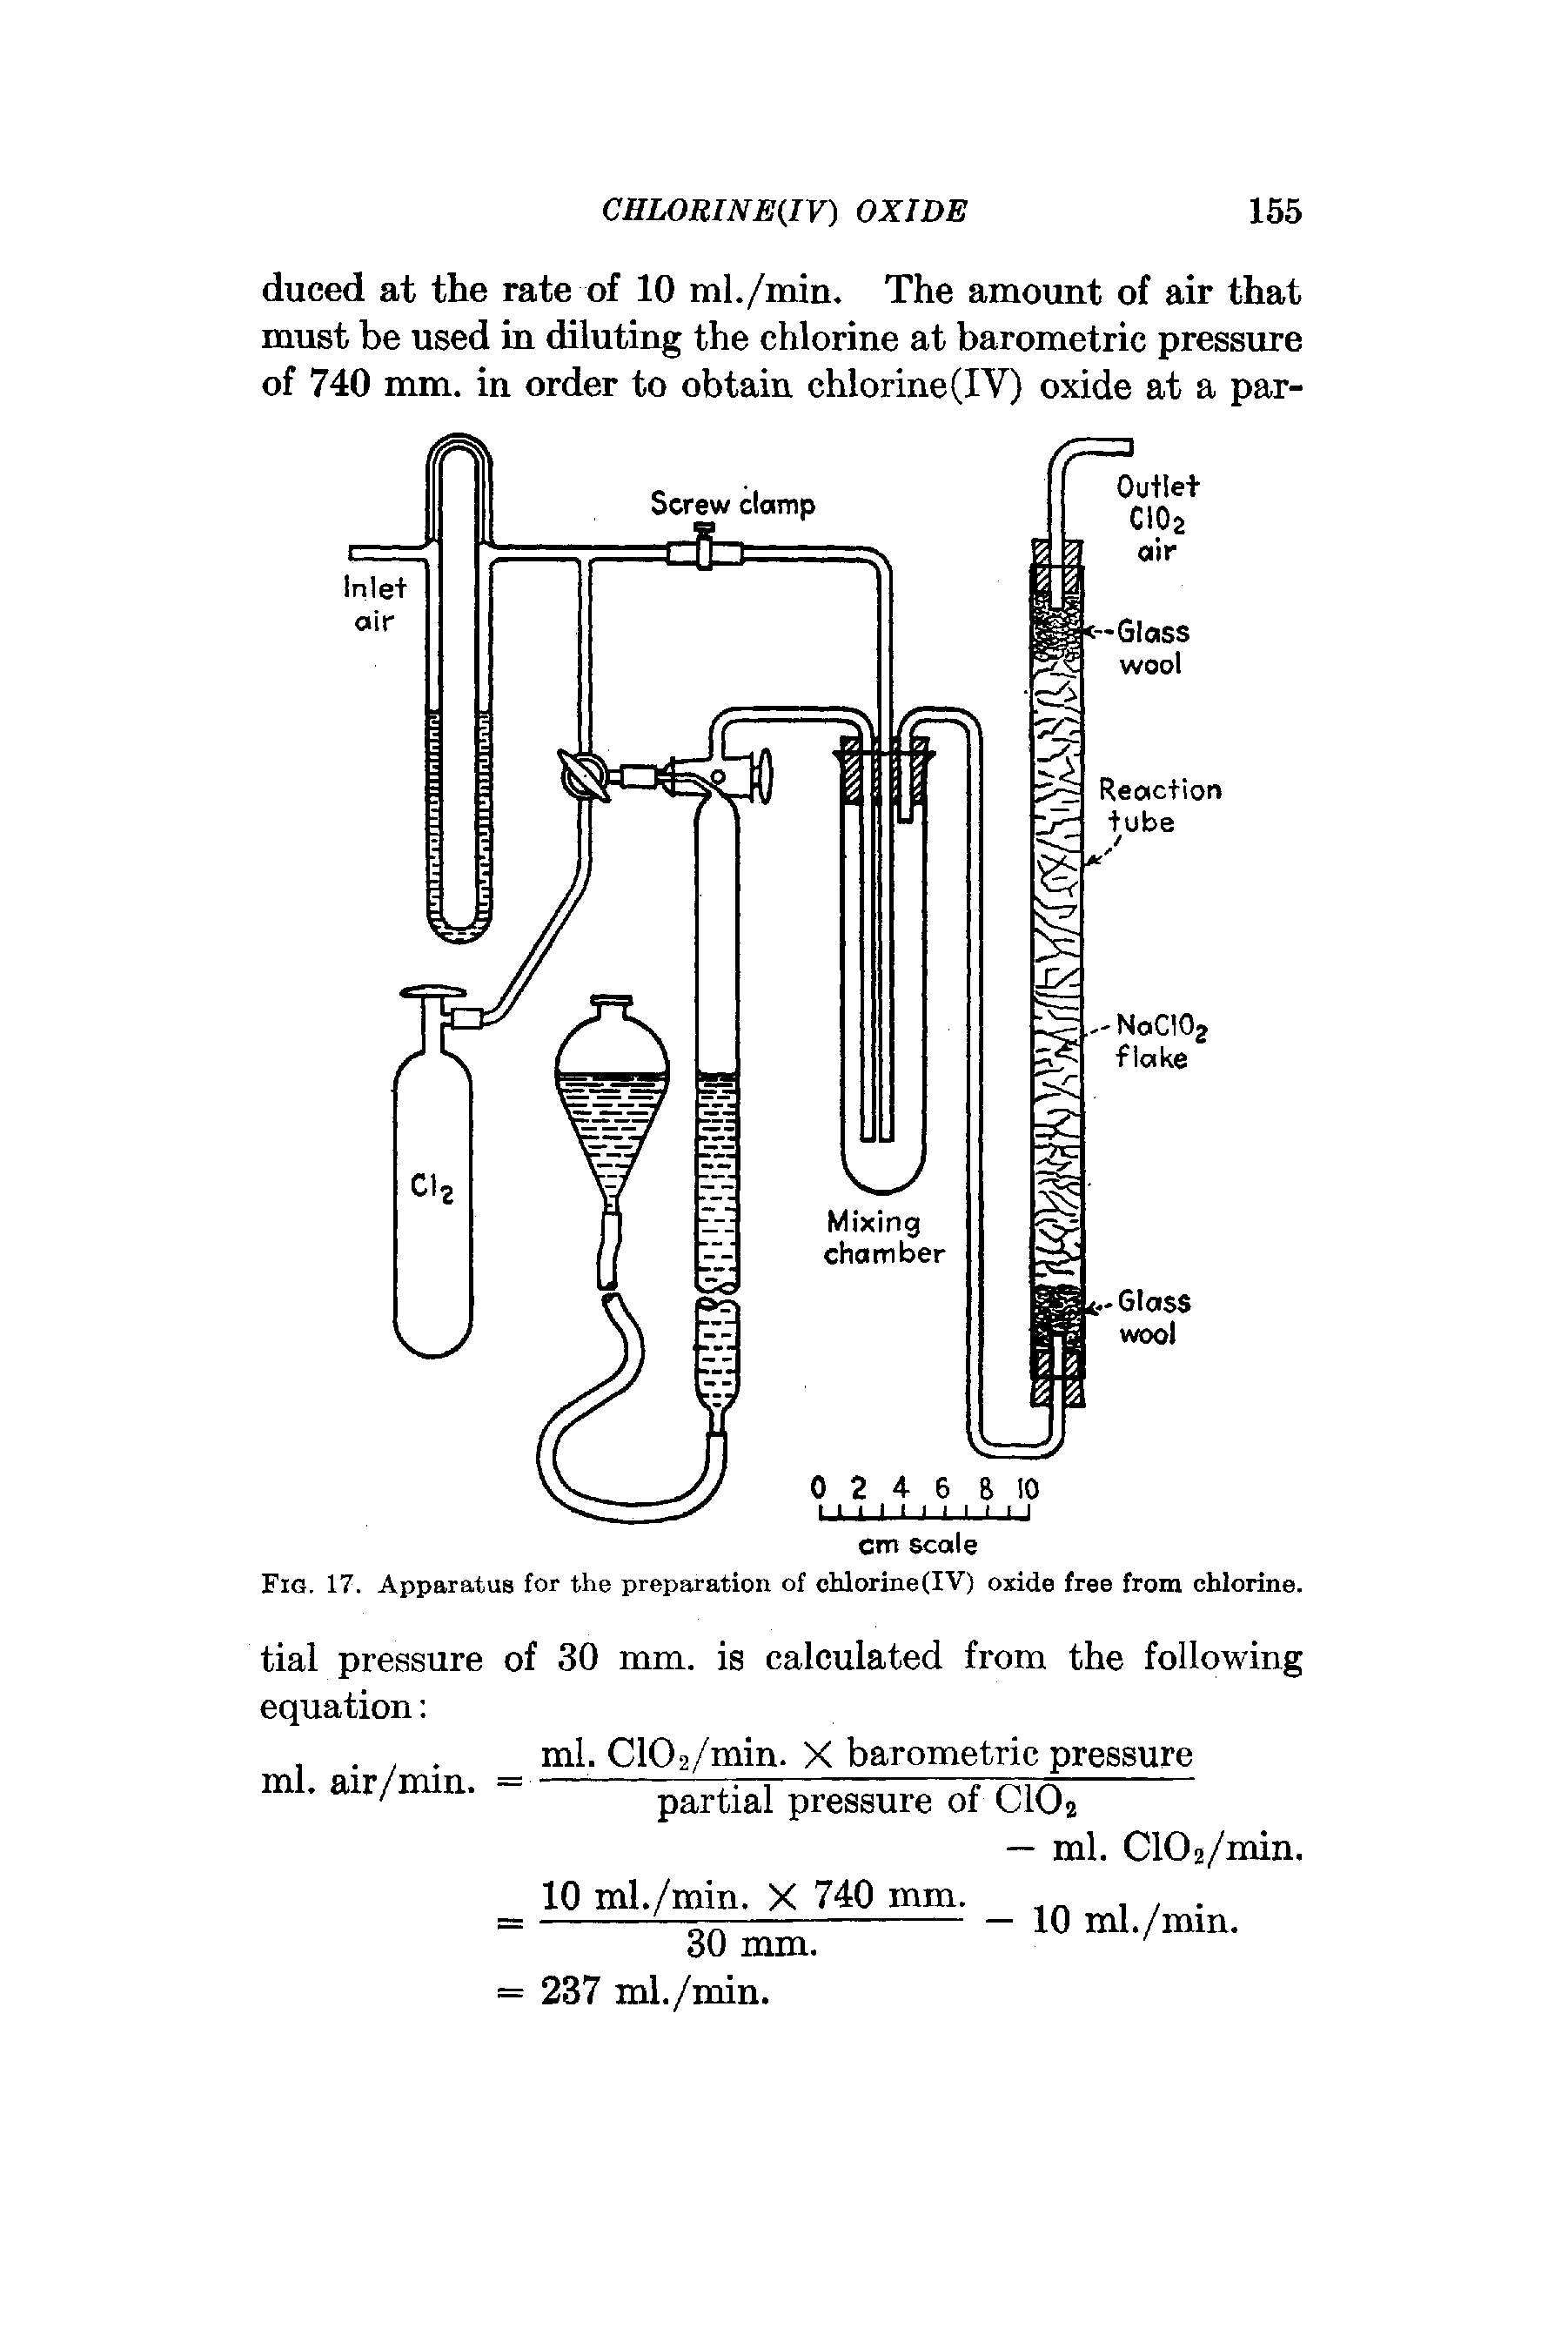 Fig. 17. Apparatus for the preparation of chlorine(IV) oxide free from chlorine.